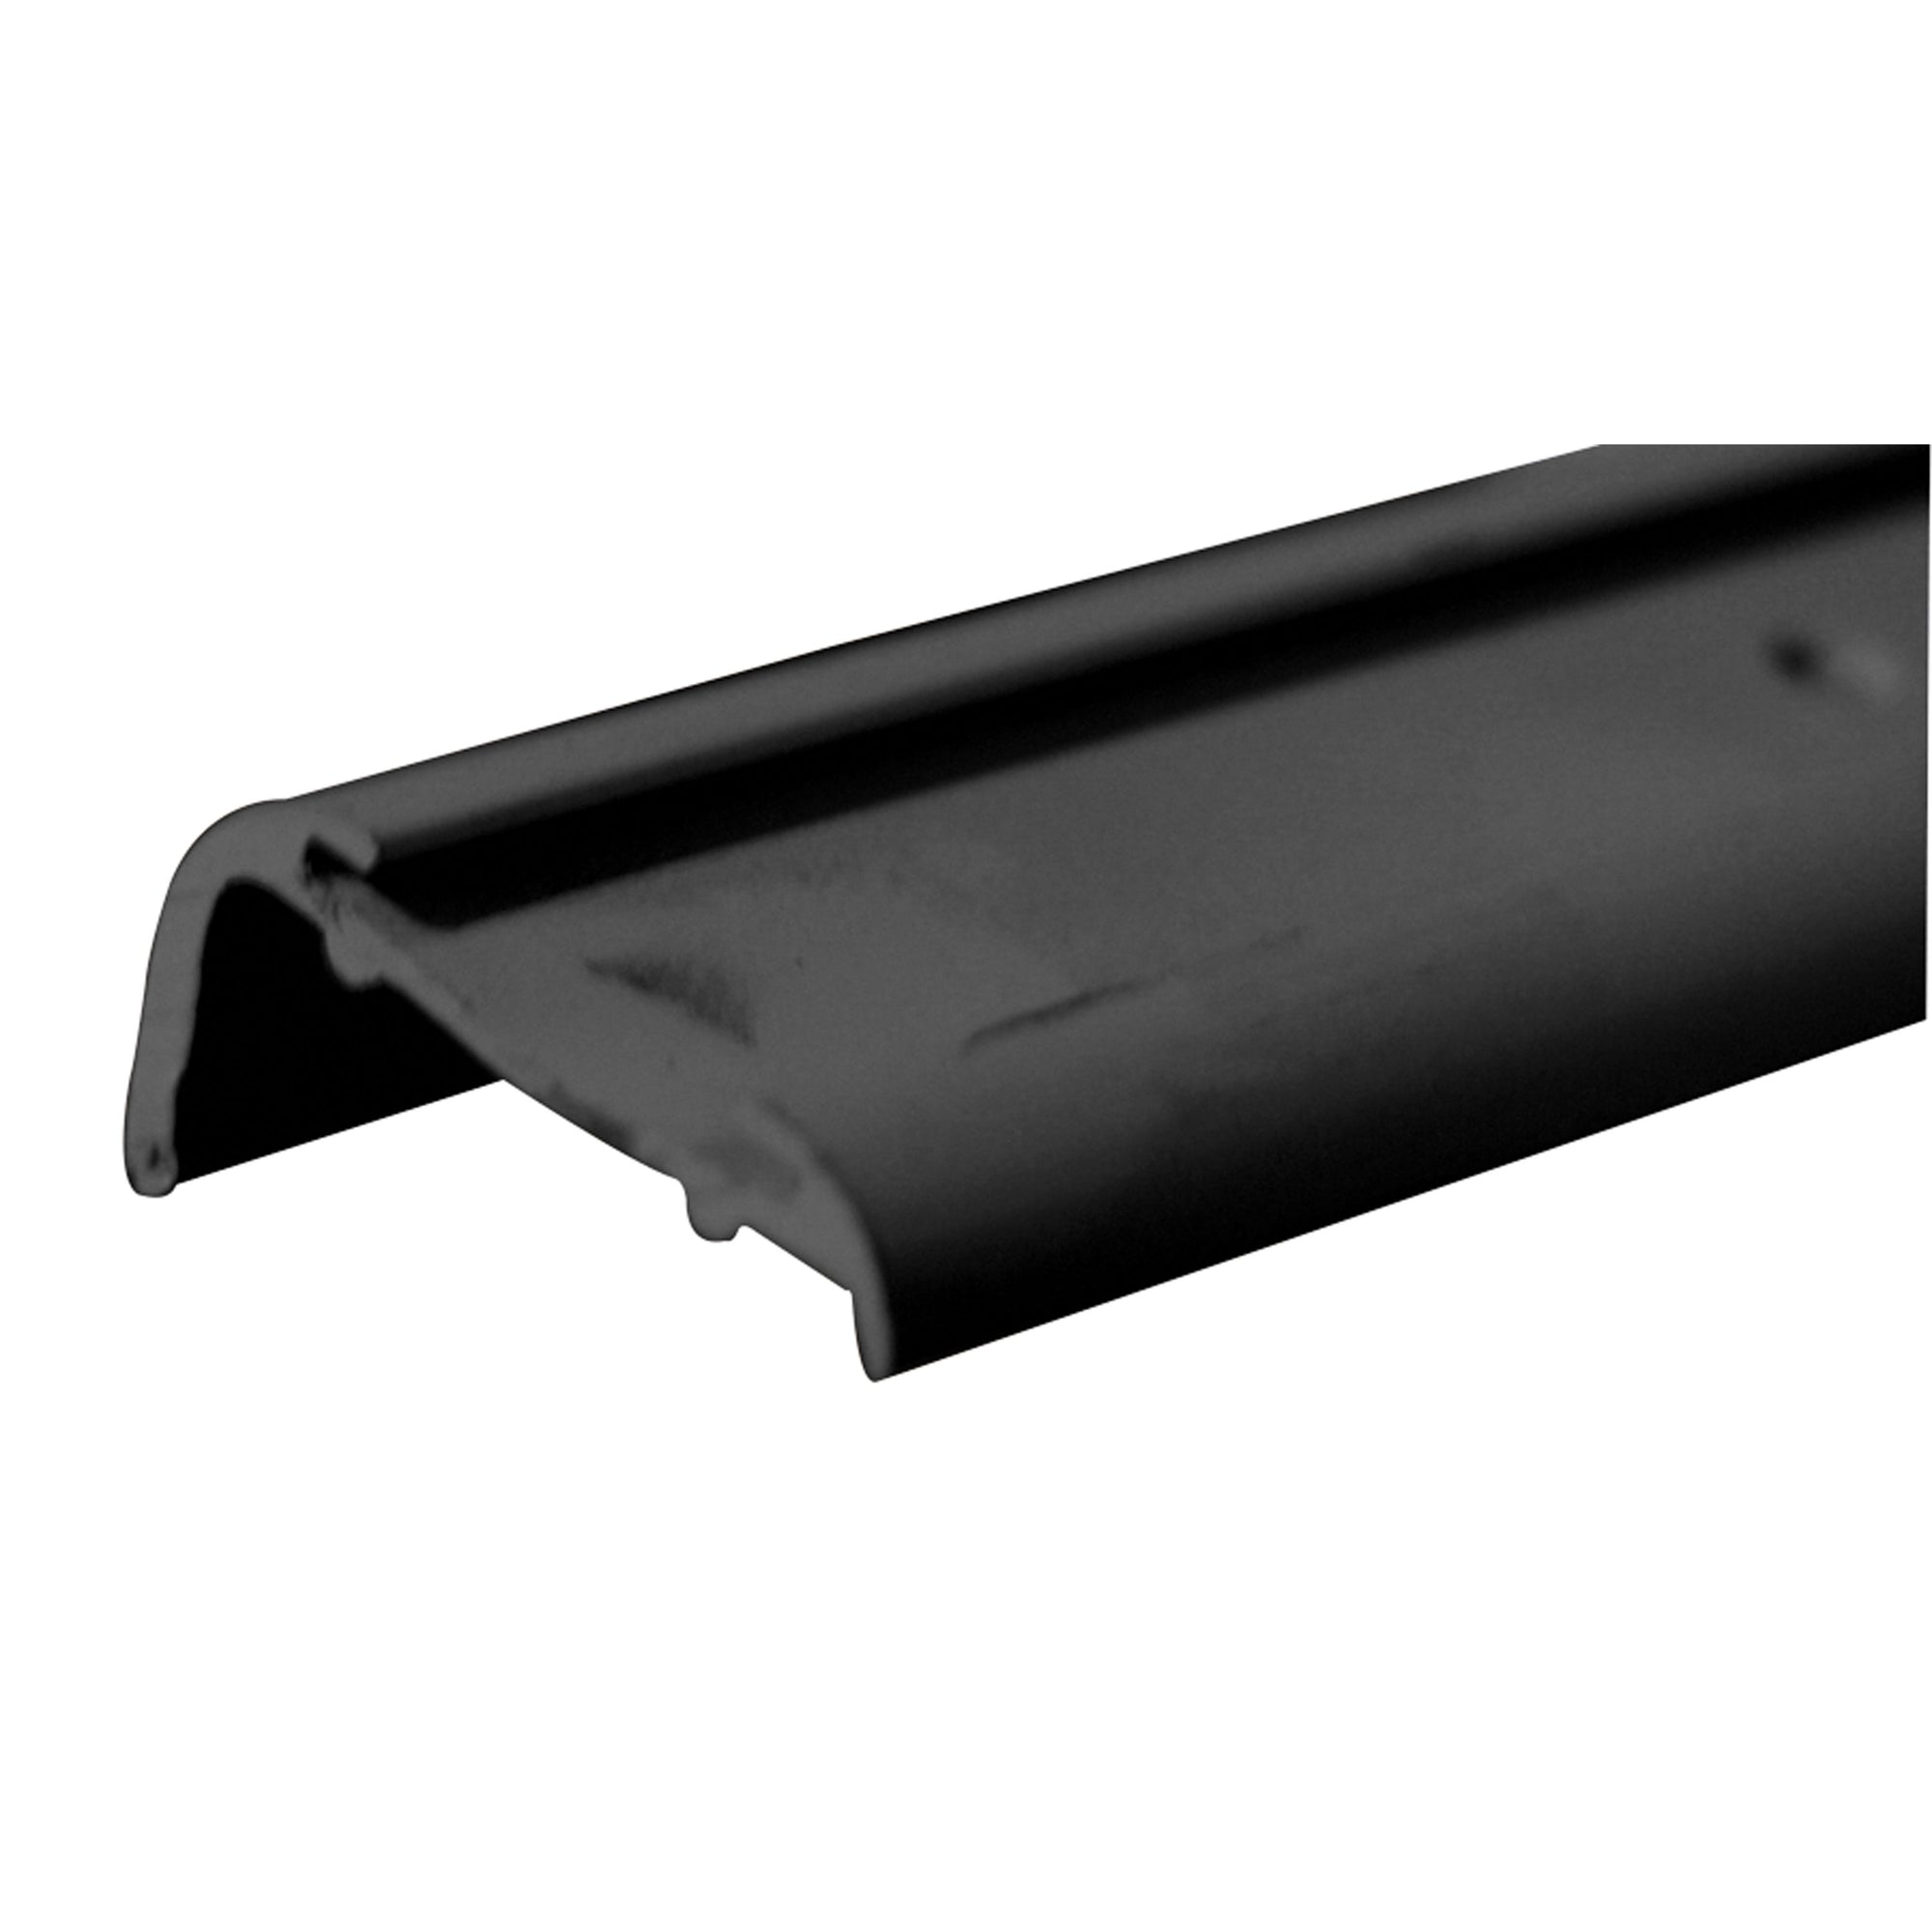 AP Products 021-57402-8 Insert Roof Edge - 8 ft. (5 Pack)